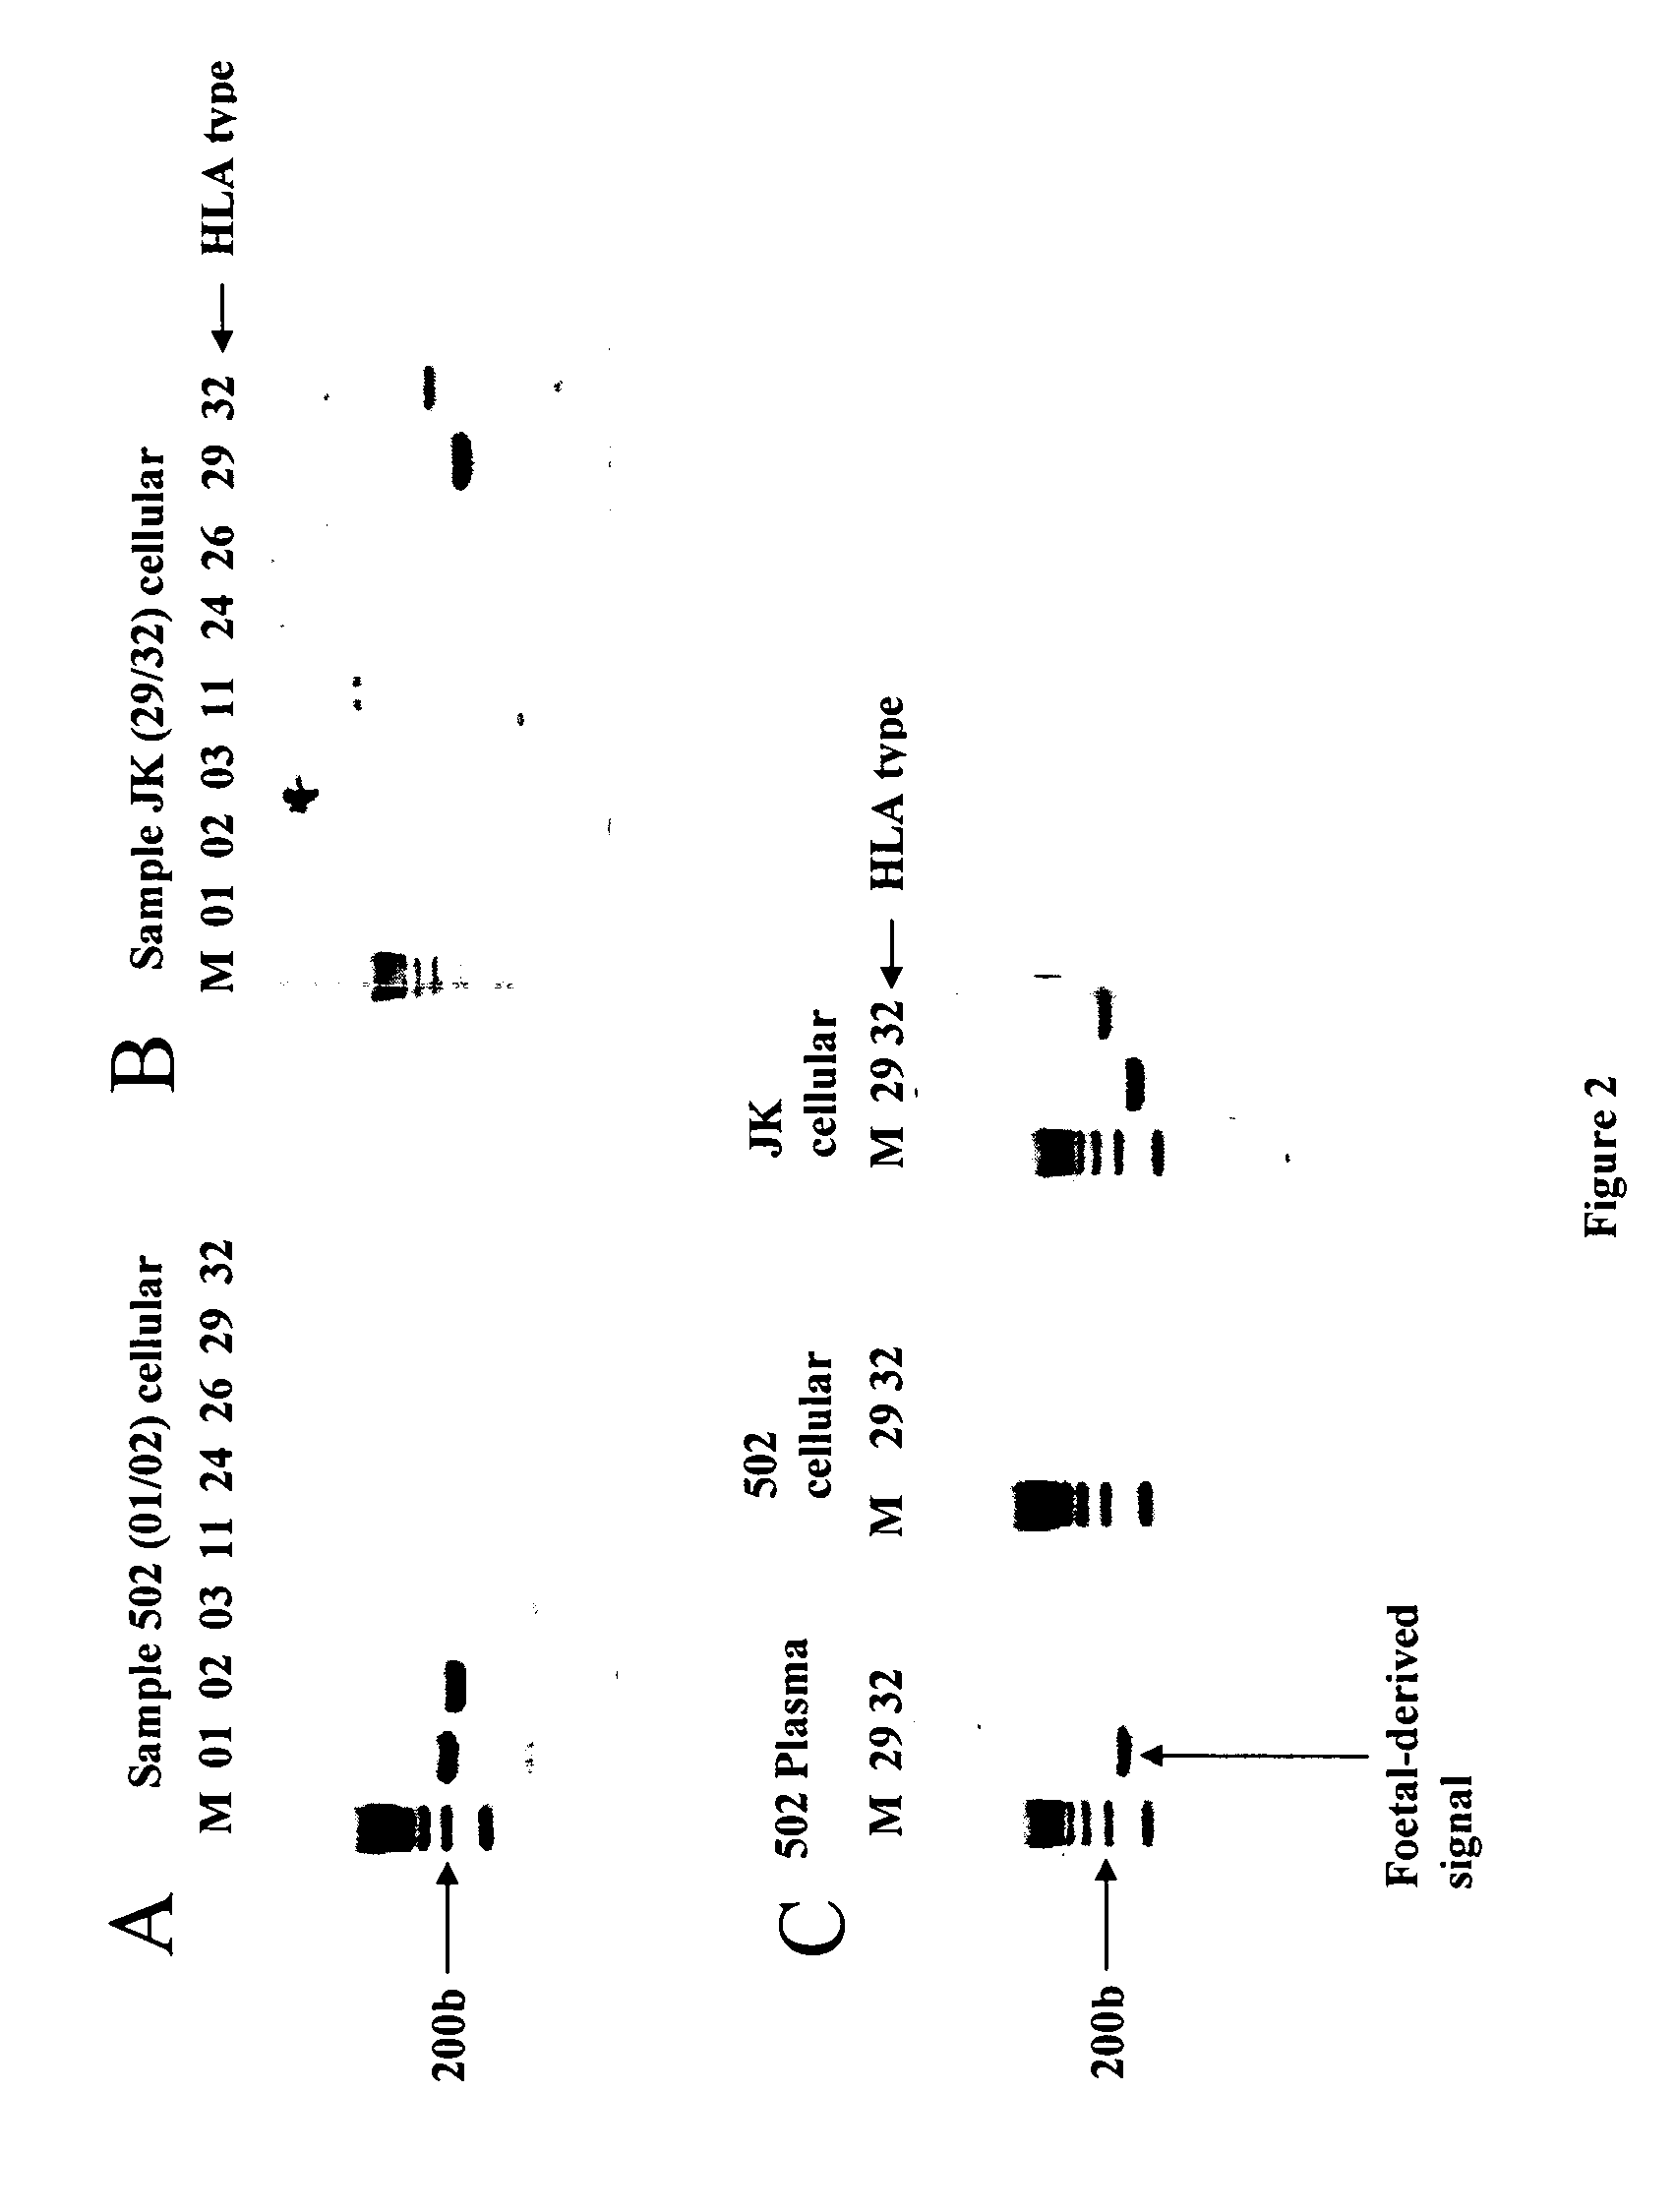 Identification of fetal dna and fetal cell markers in maternal plasma or serum